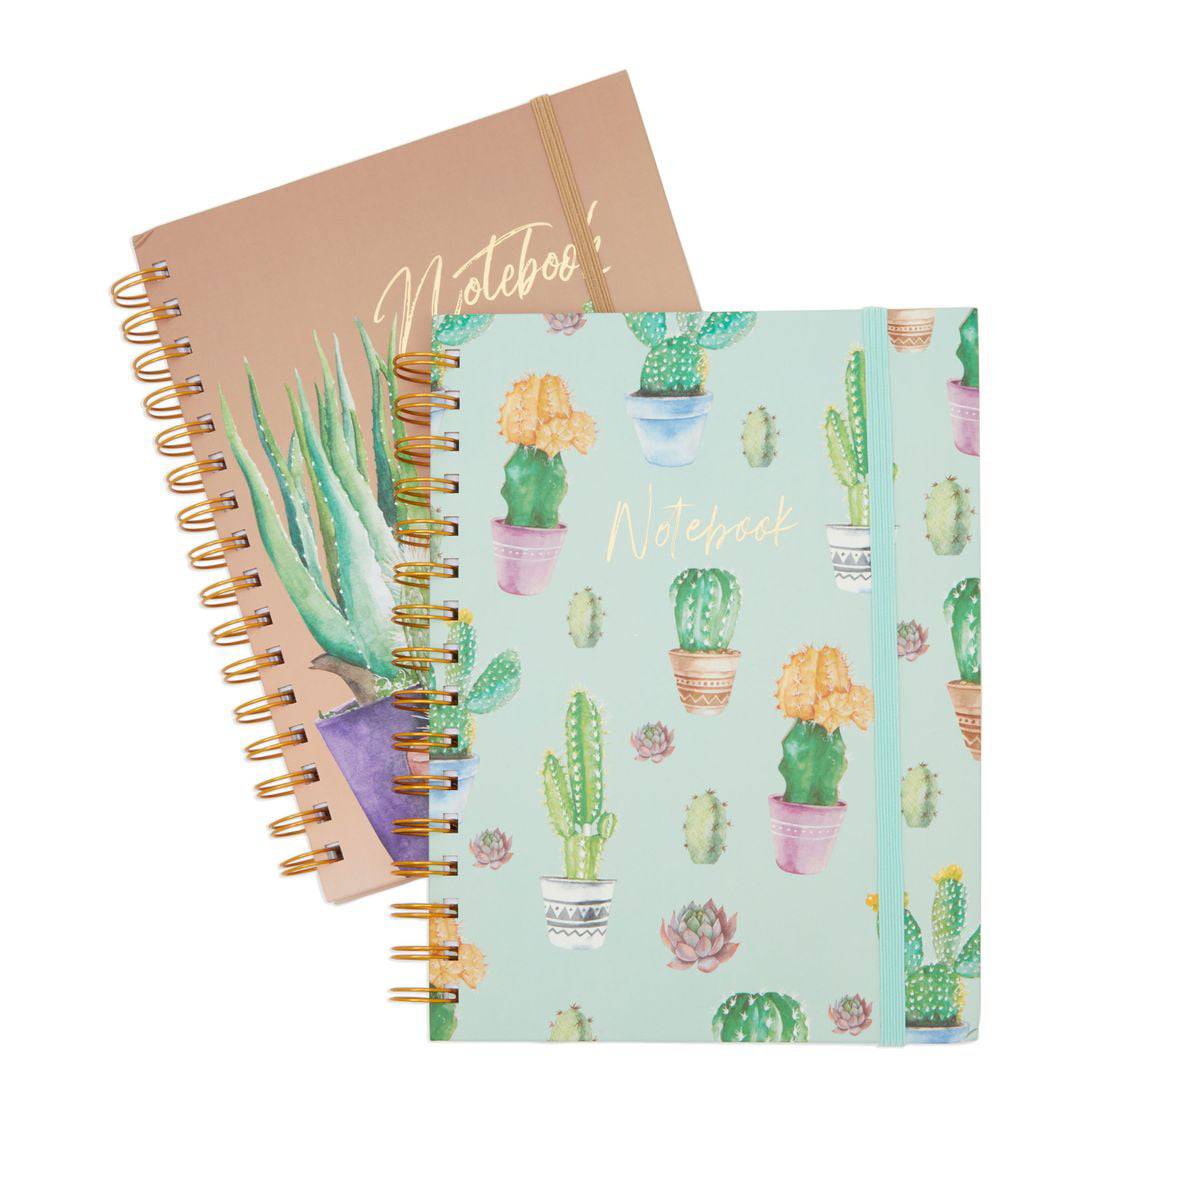 Cactus Print Hardcover 6.5" x 9.75" with Spiral Notebook Journal and Note Set 